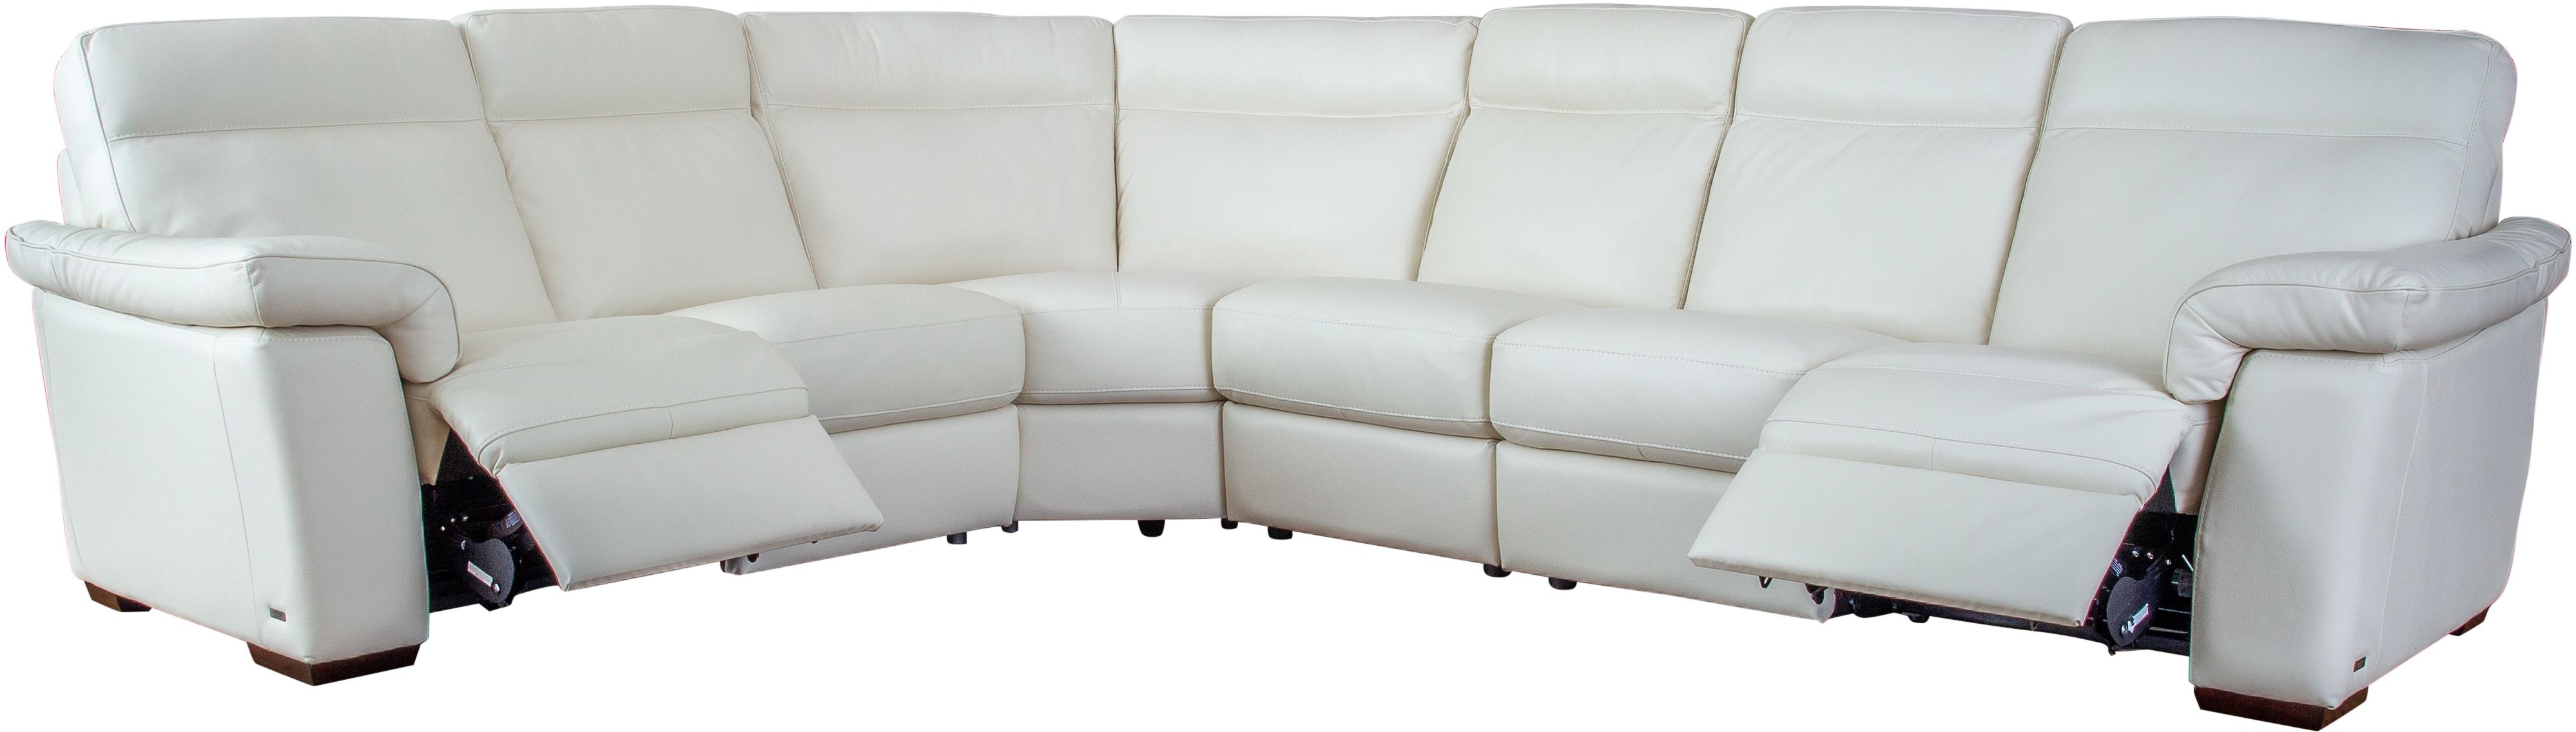 Natuzzi Editions 4pc Power Fort Myers, Florida - Reclining Sectional Leather Gallery FL 